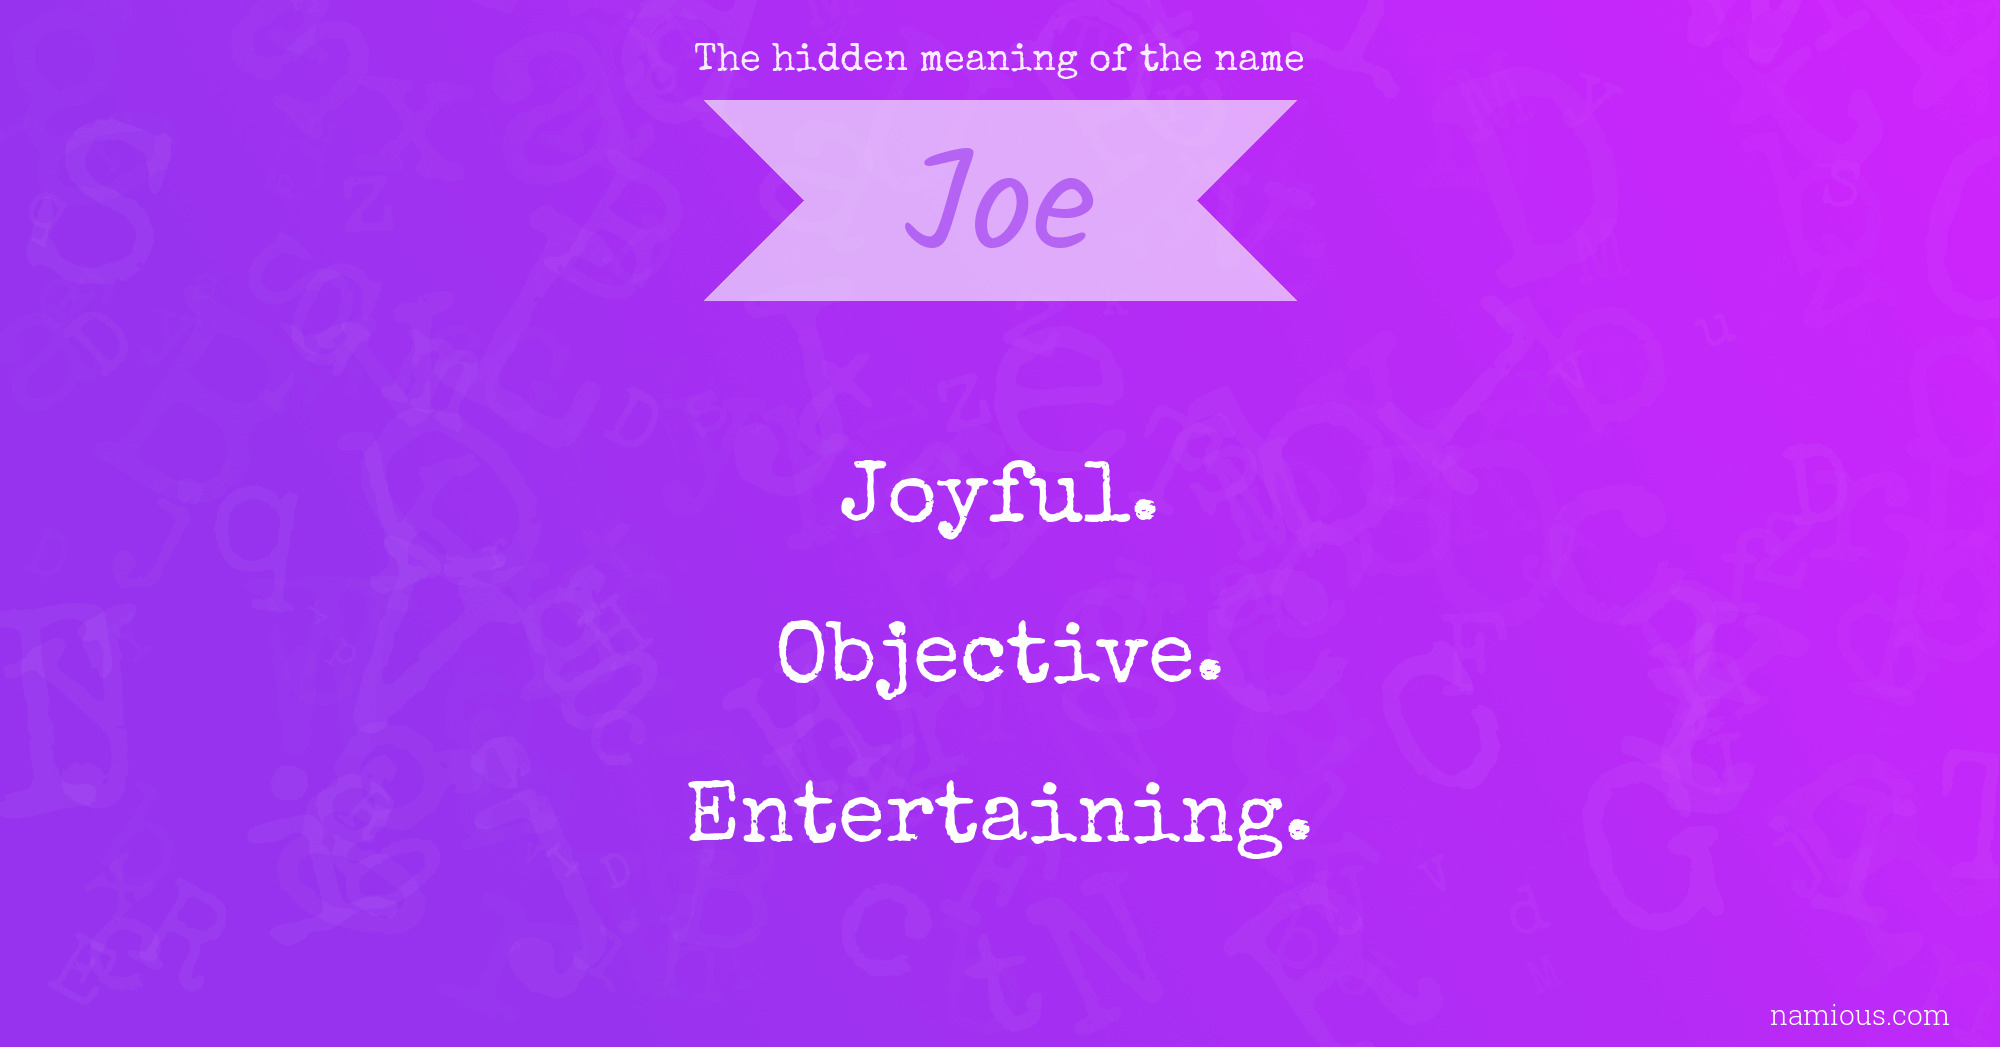 The hidden meaning of the name Joe